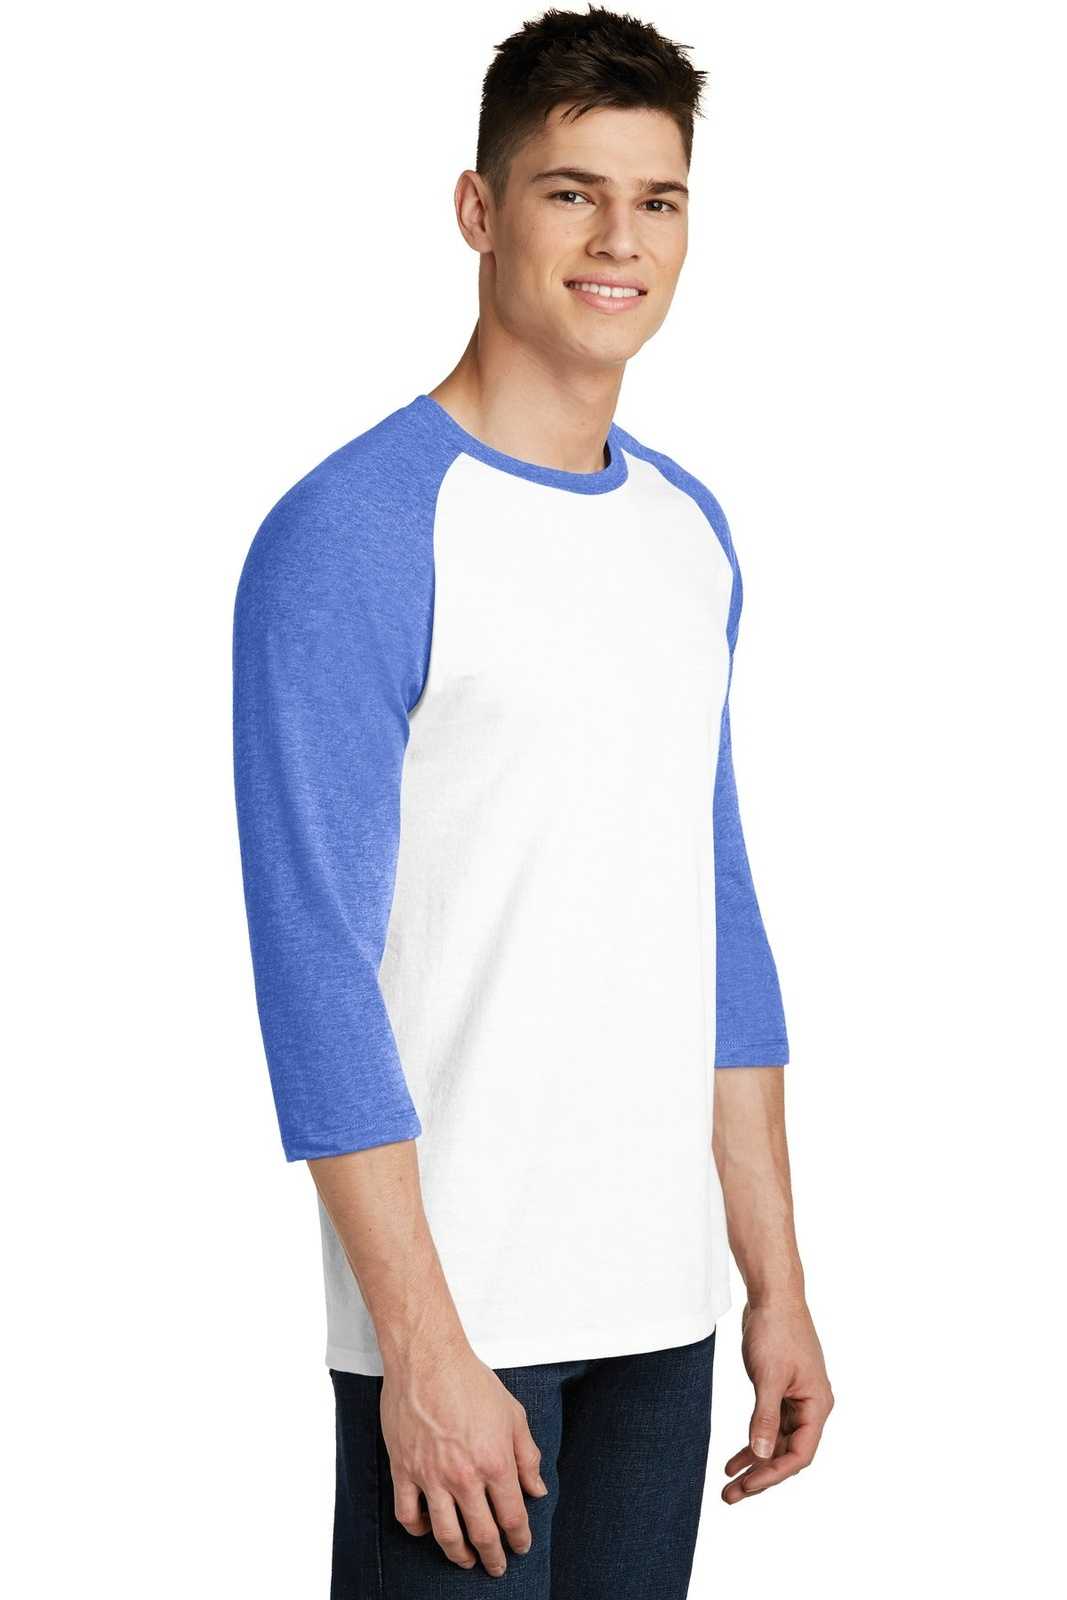 District DT6210 Very Important Tee 3/4-Sleeve Raglan - Royal Frost White - HIT a Double - 4